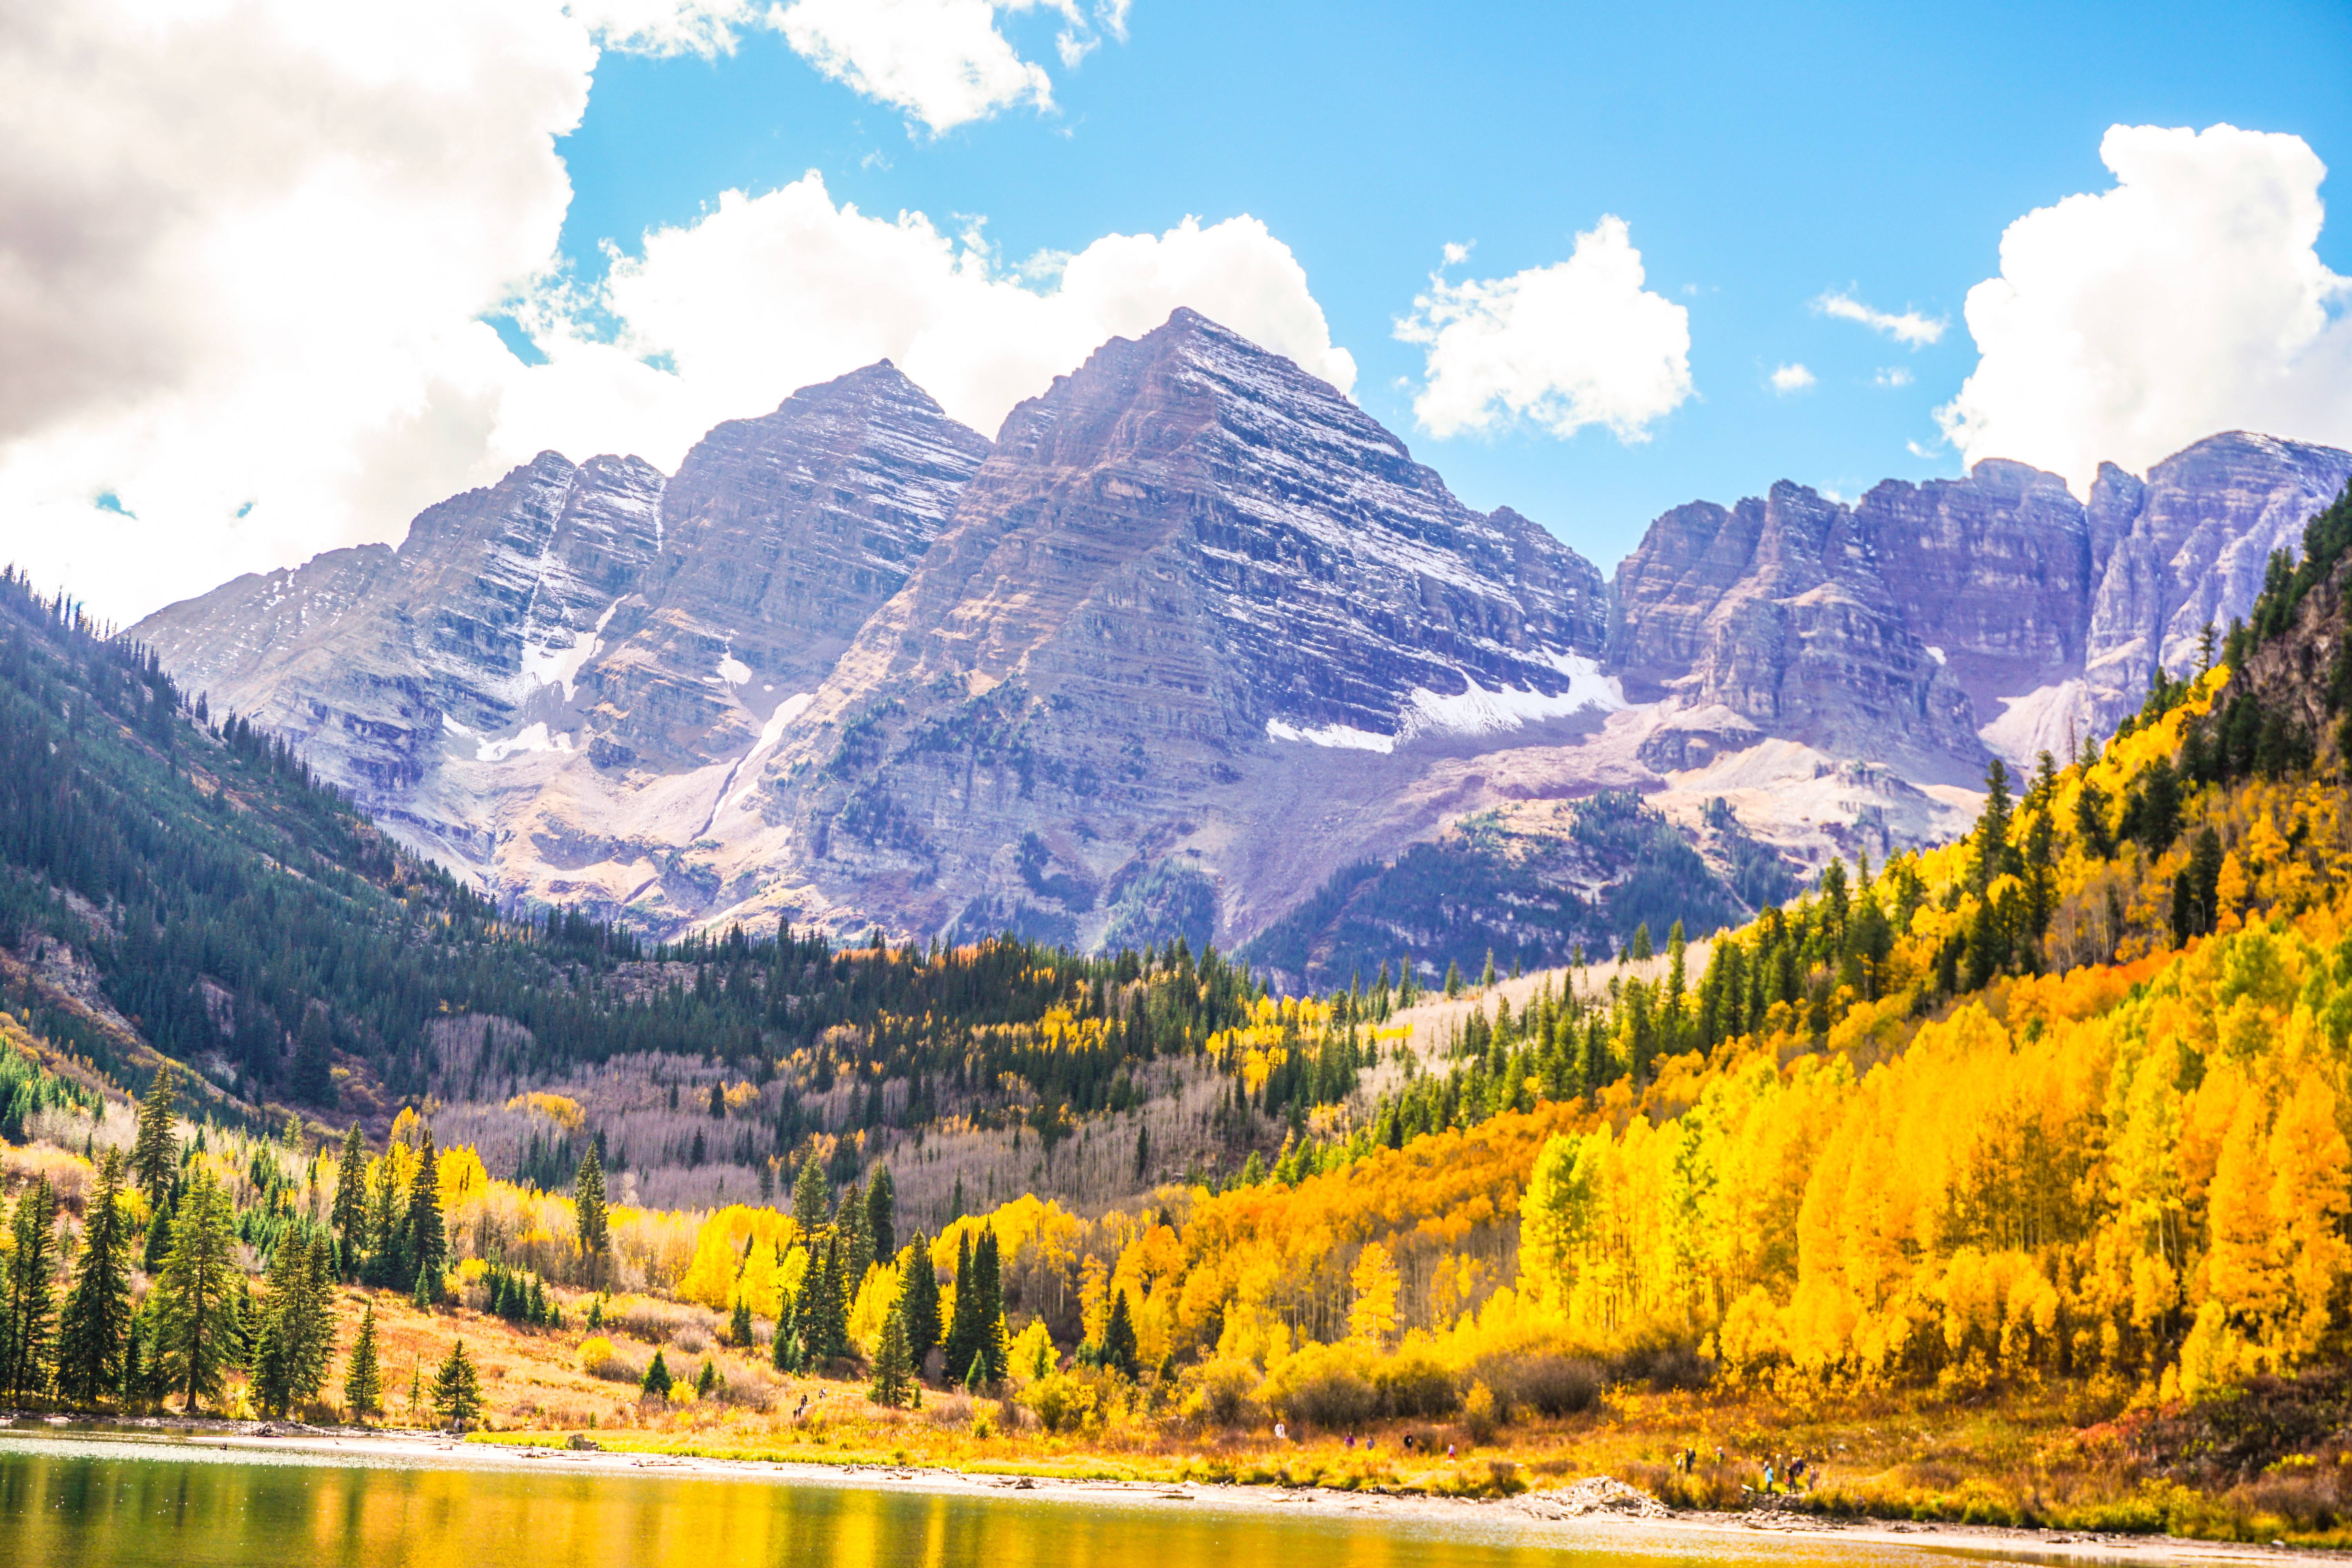 The most beautiful place in the world, during the fall. Maroon Bells ...